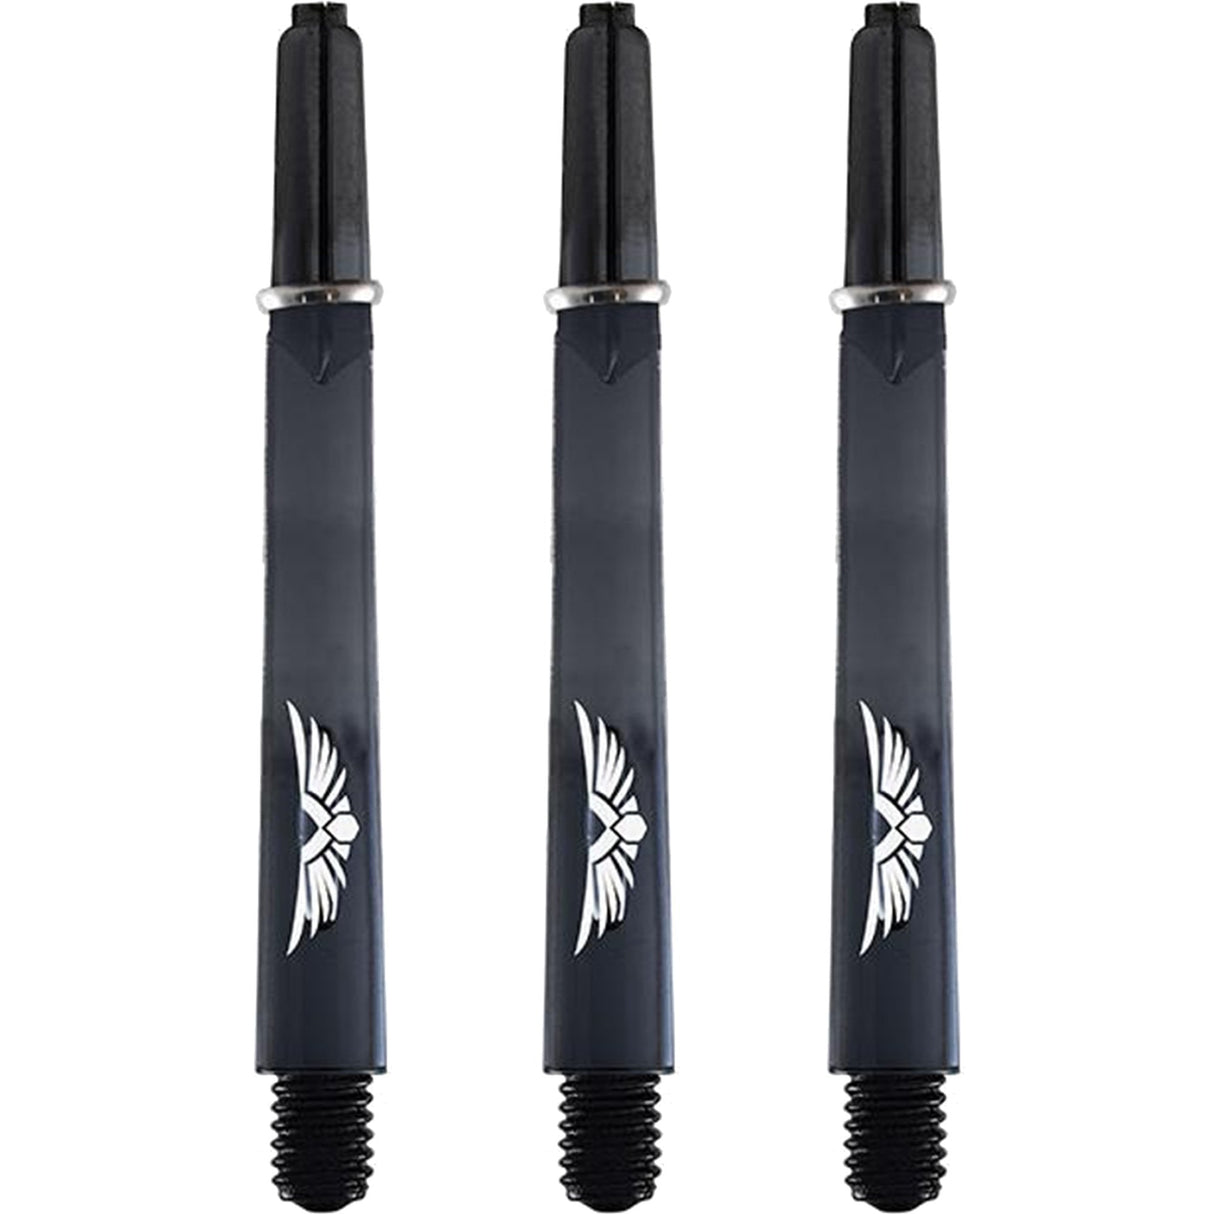 Shot Eagle Claw Dart Shafts - with Machined Rings - Strong Polycarbonate Stems - Clear Black Medium